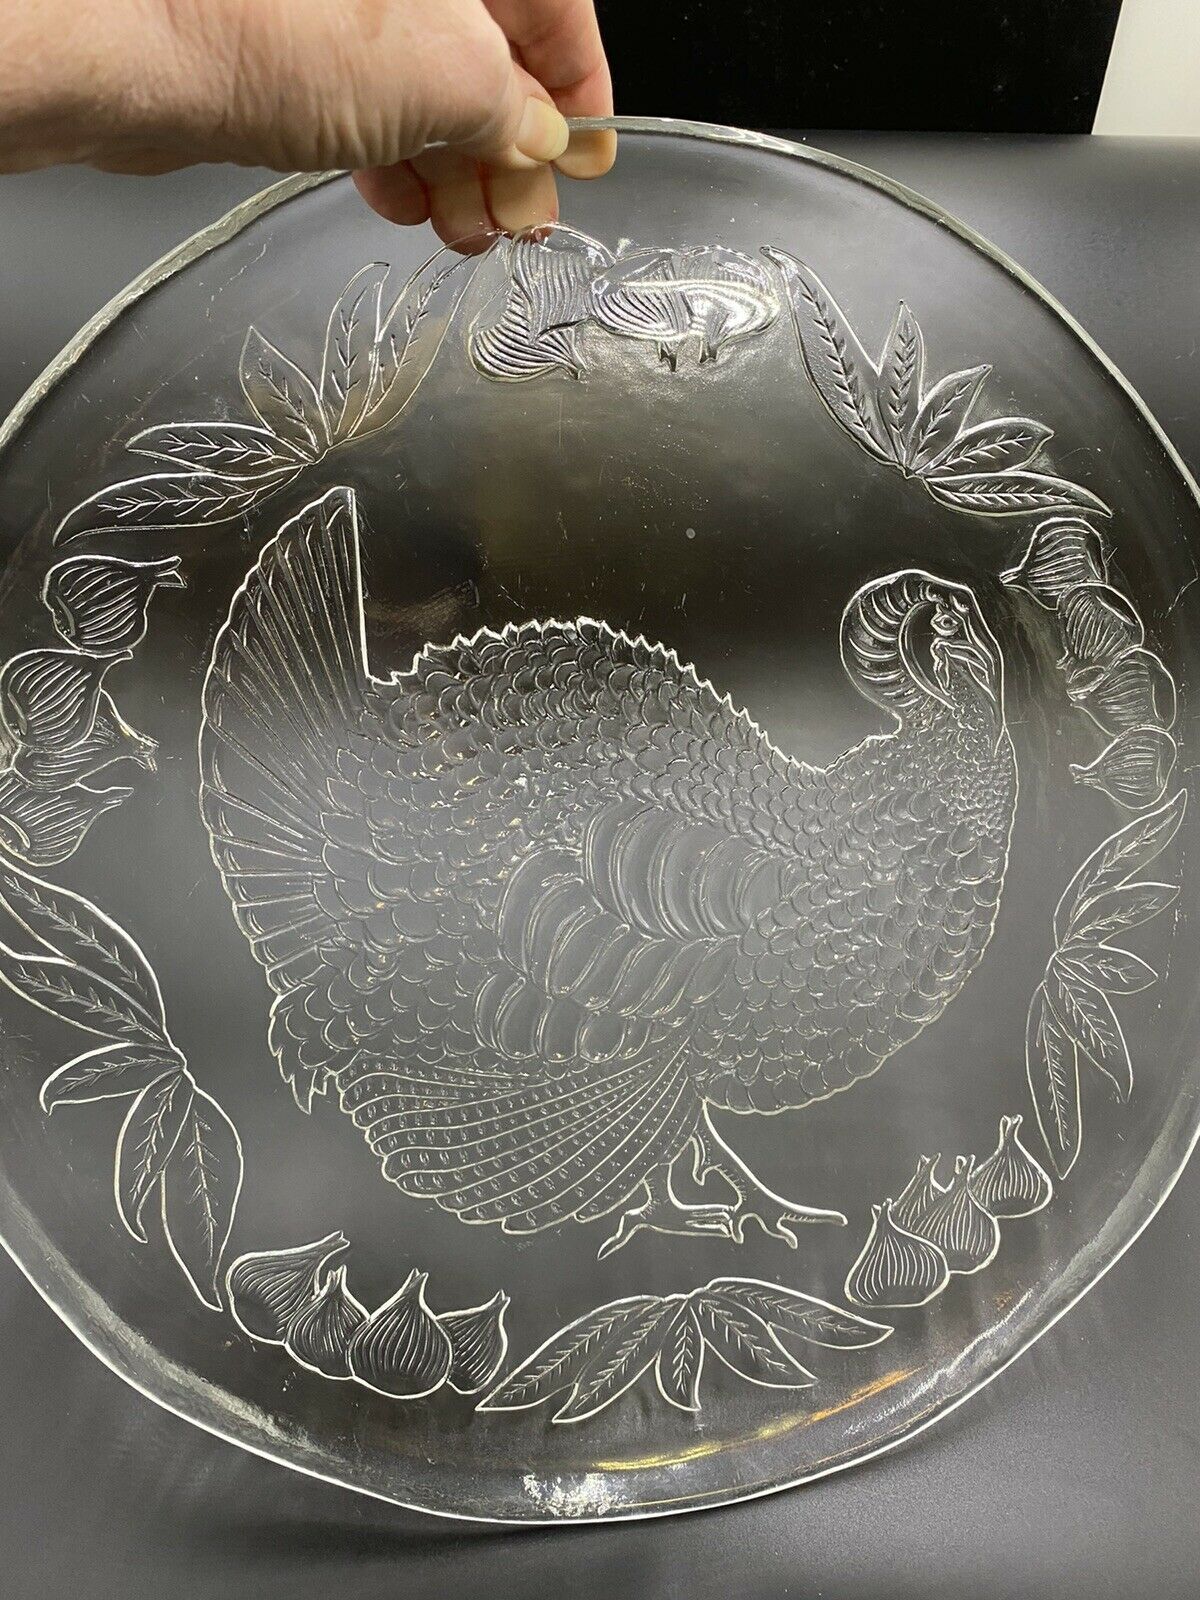 IVV Mouth Blown Glass Embossed Turkey Platter Italy